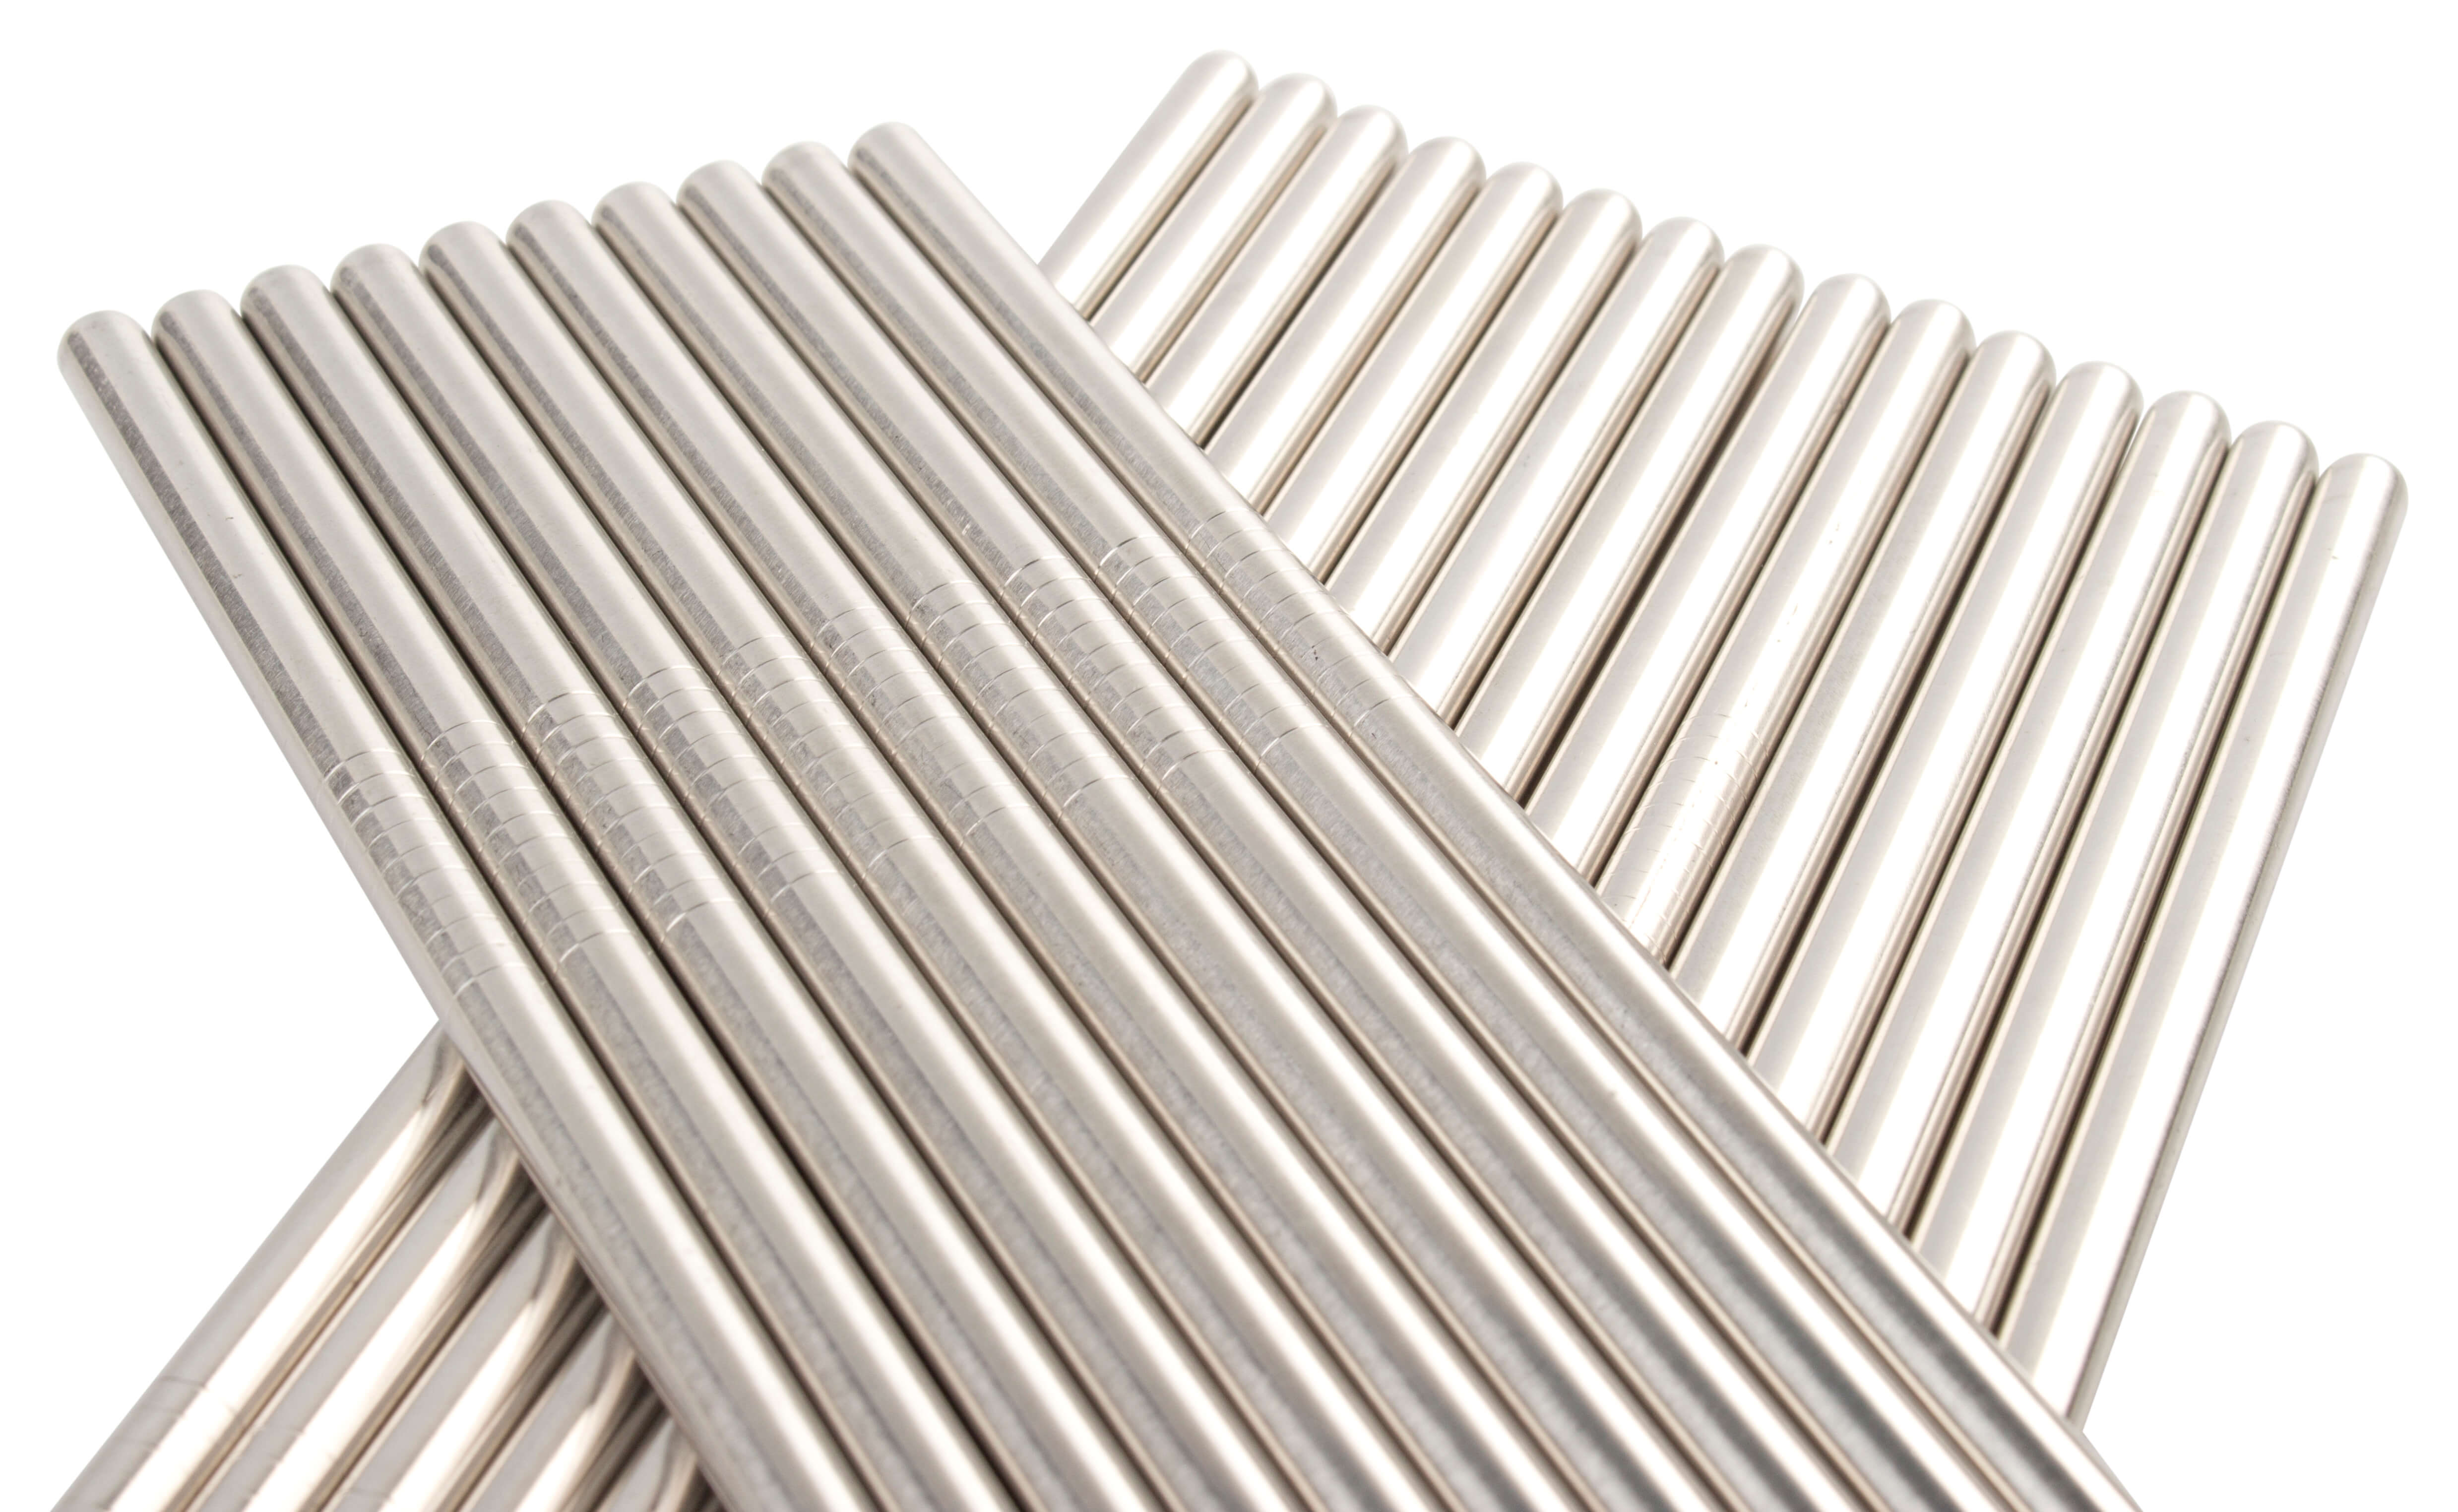 Drinking straws, stainless steel (6x210mm) - 25 pcs.